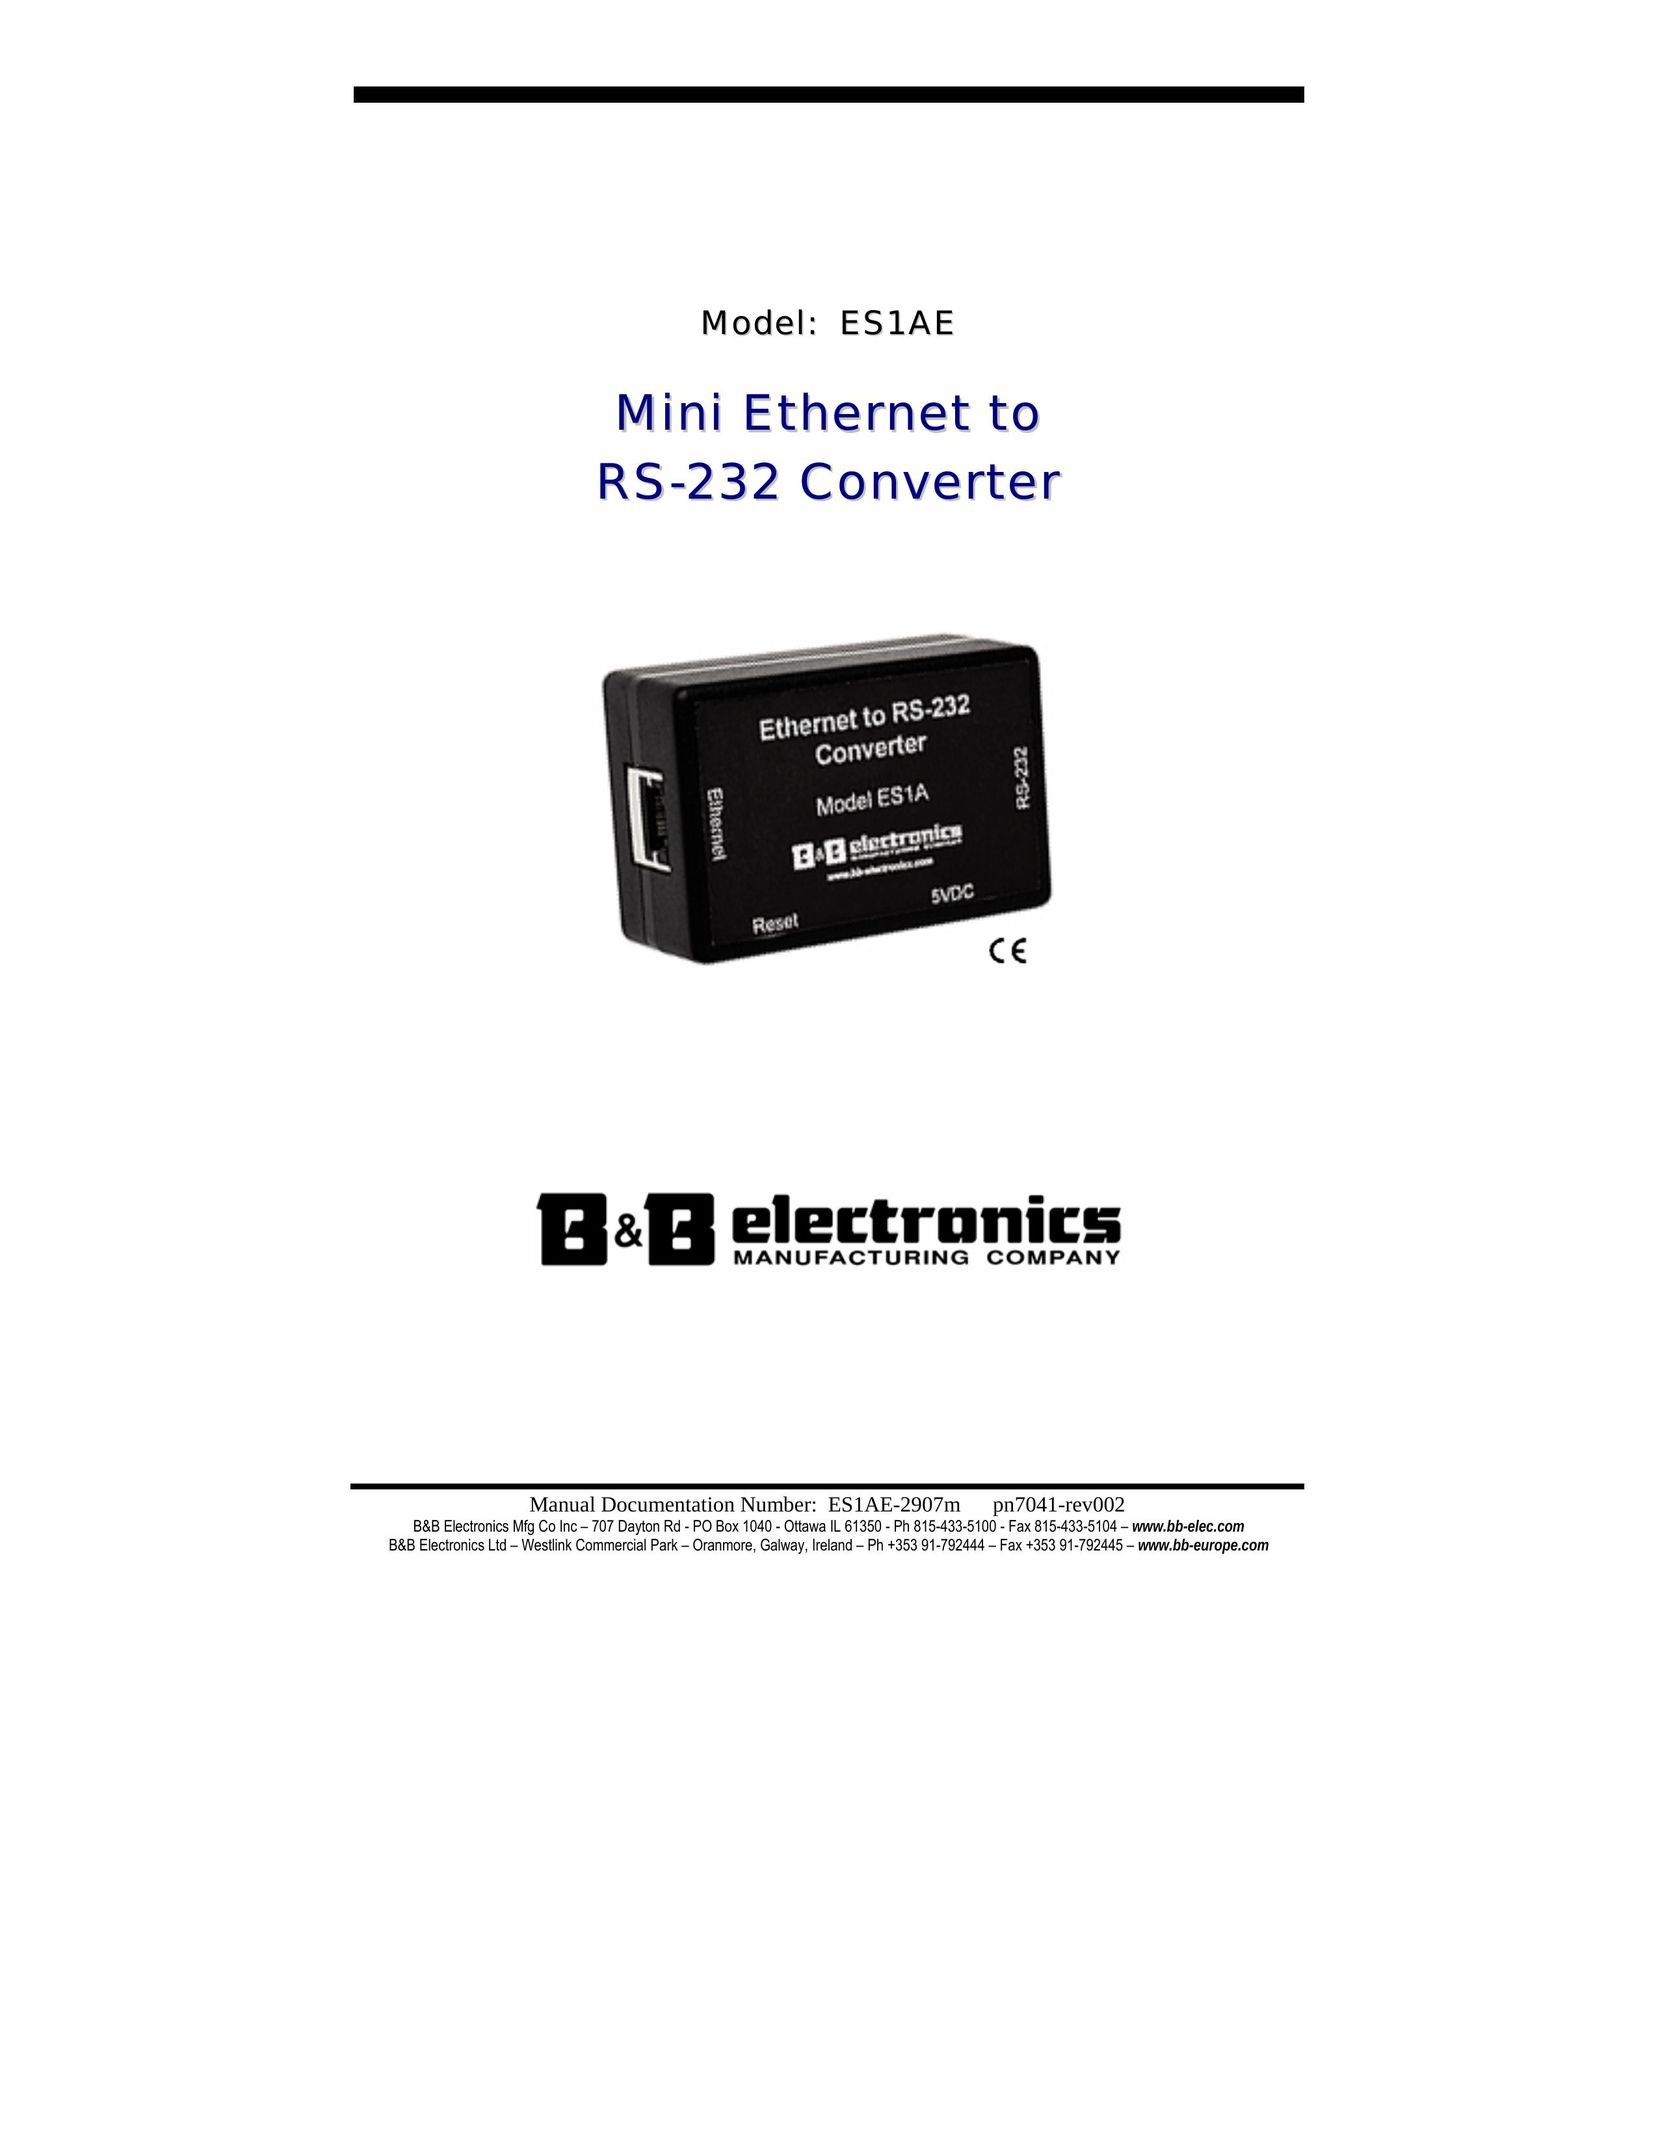 B&B Electronics ES1AE Network Router User Manual